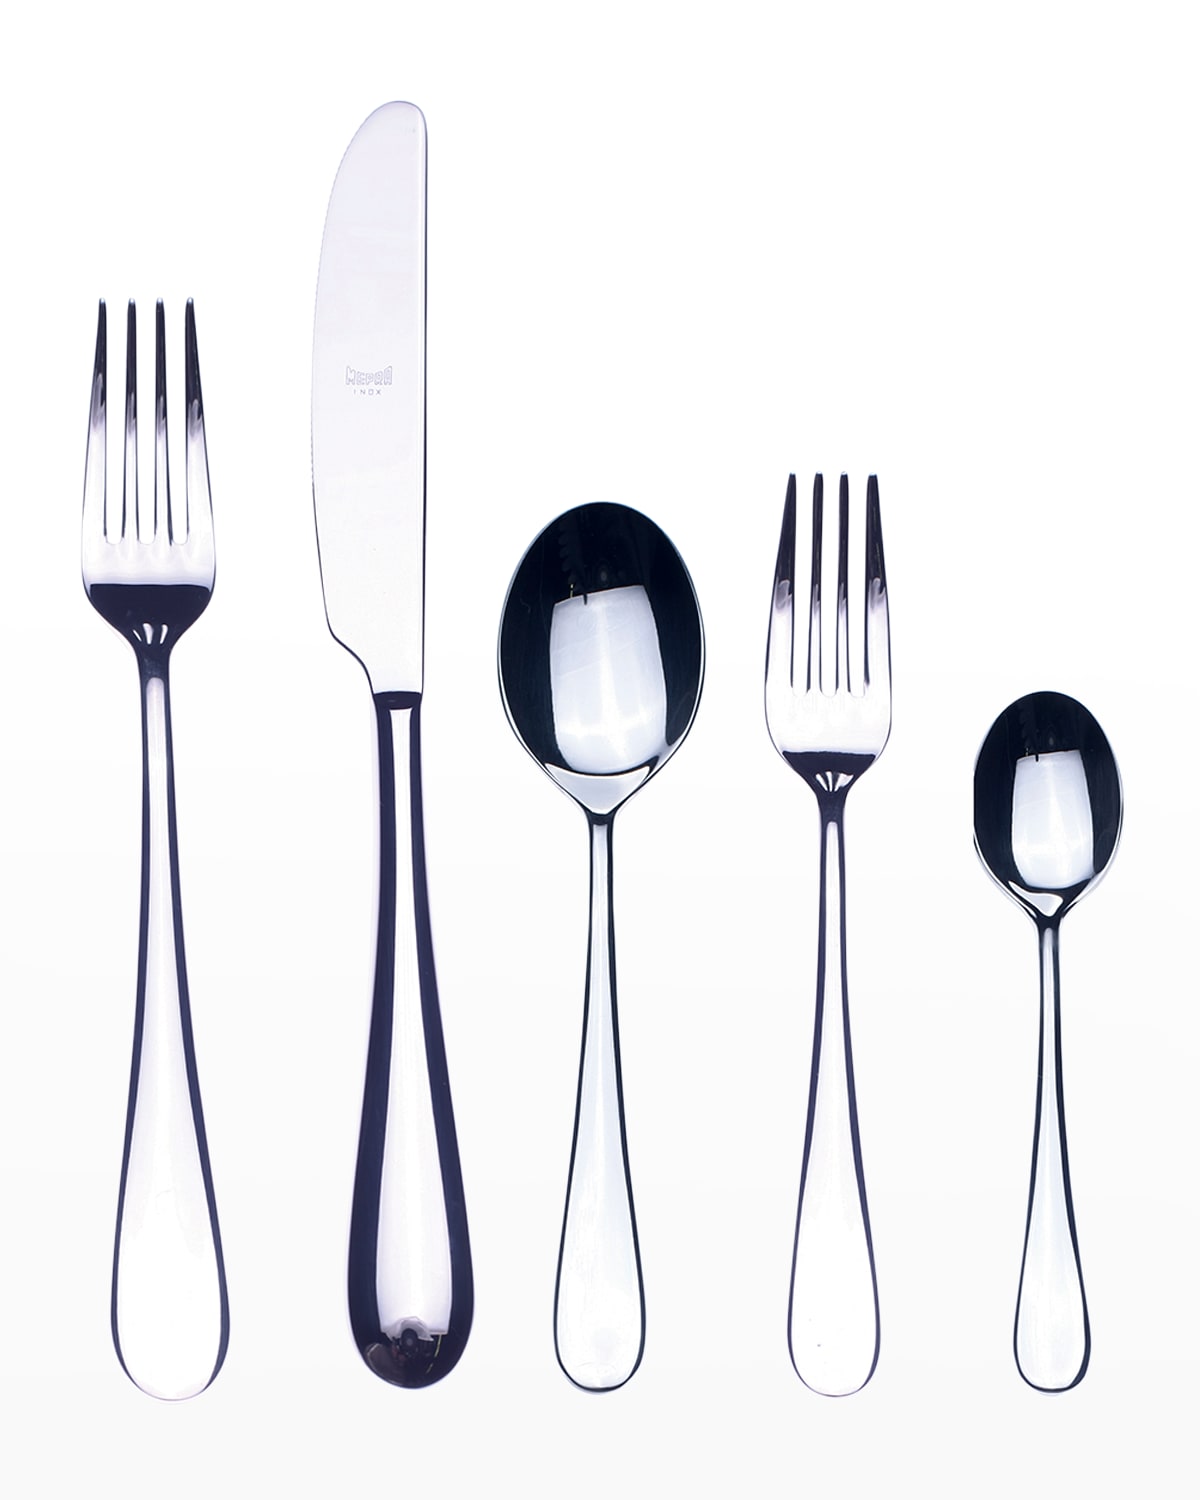 MEPRA 5-PIECE STAINLESS STEEL FLATWARE PLACE SETTING